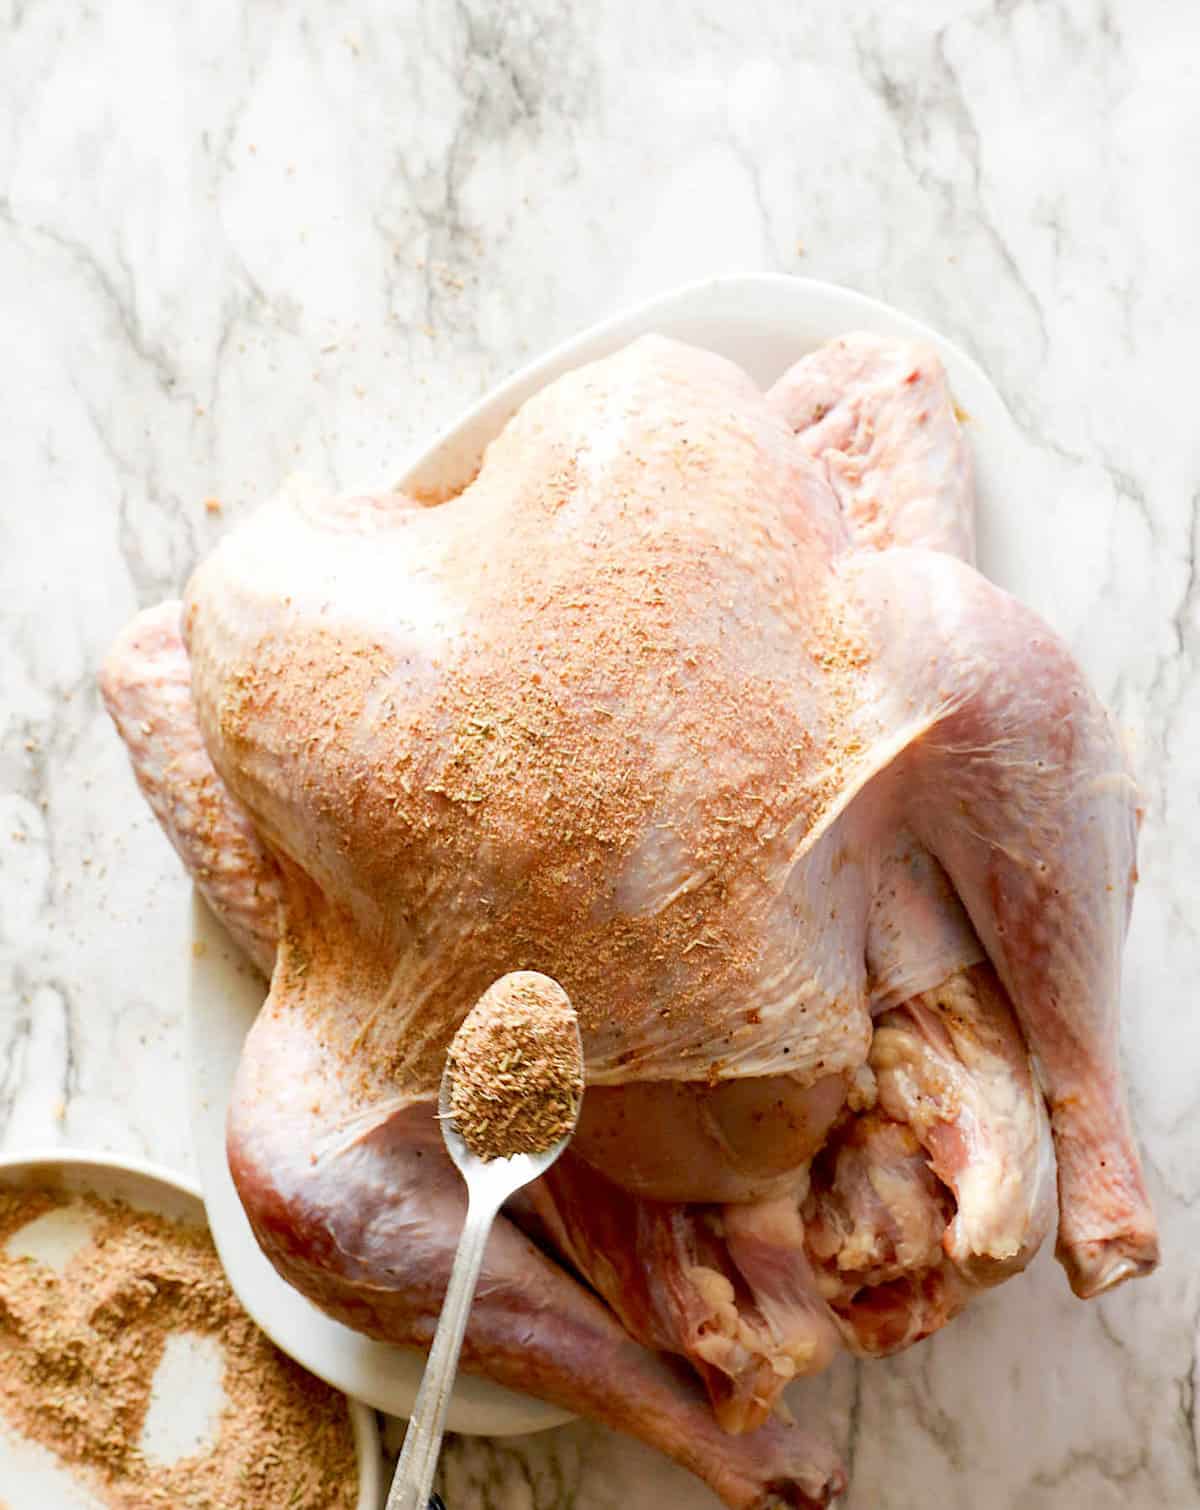 Add your favorite rub to your marinade injected turkey and bake or fry